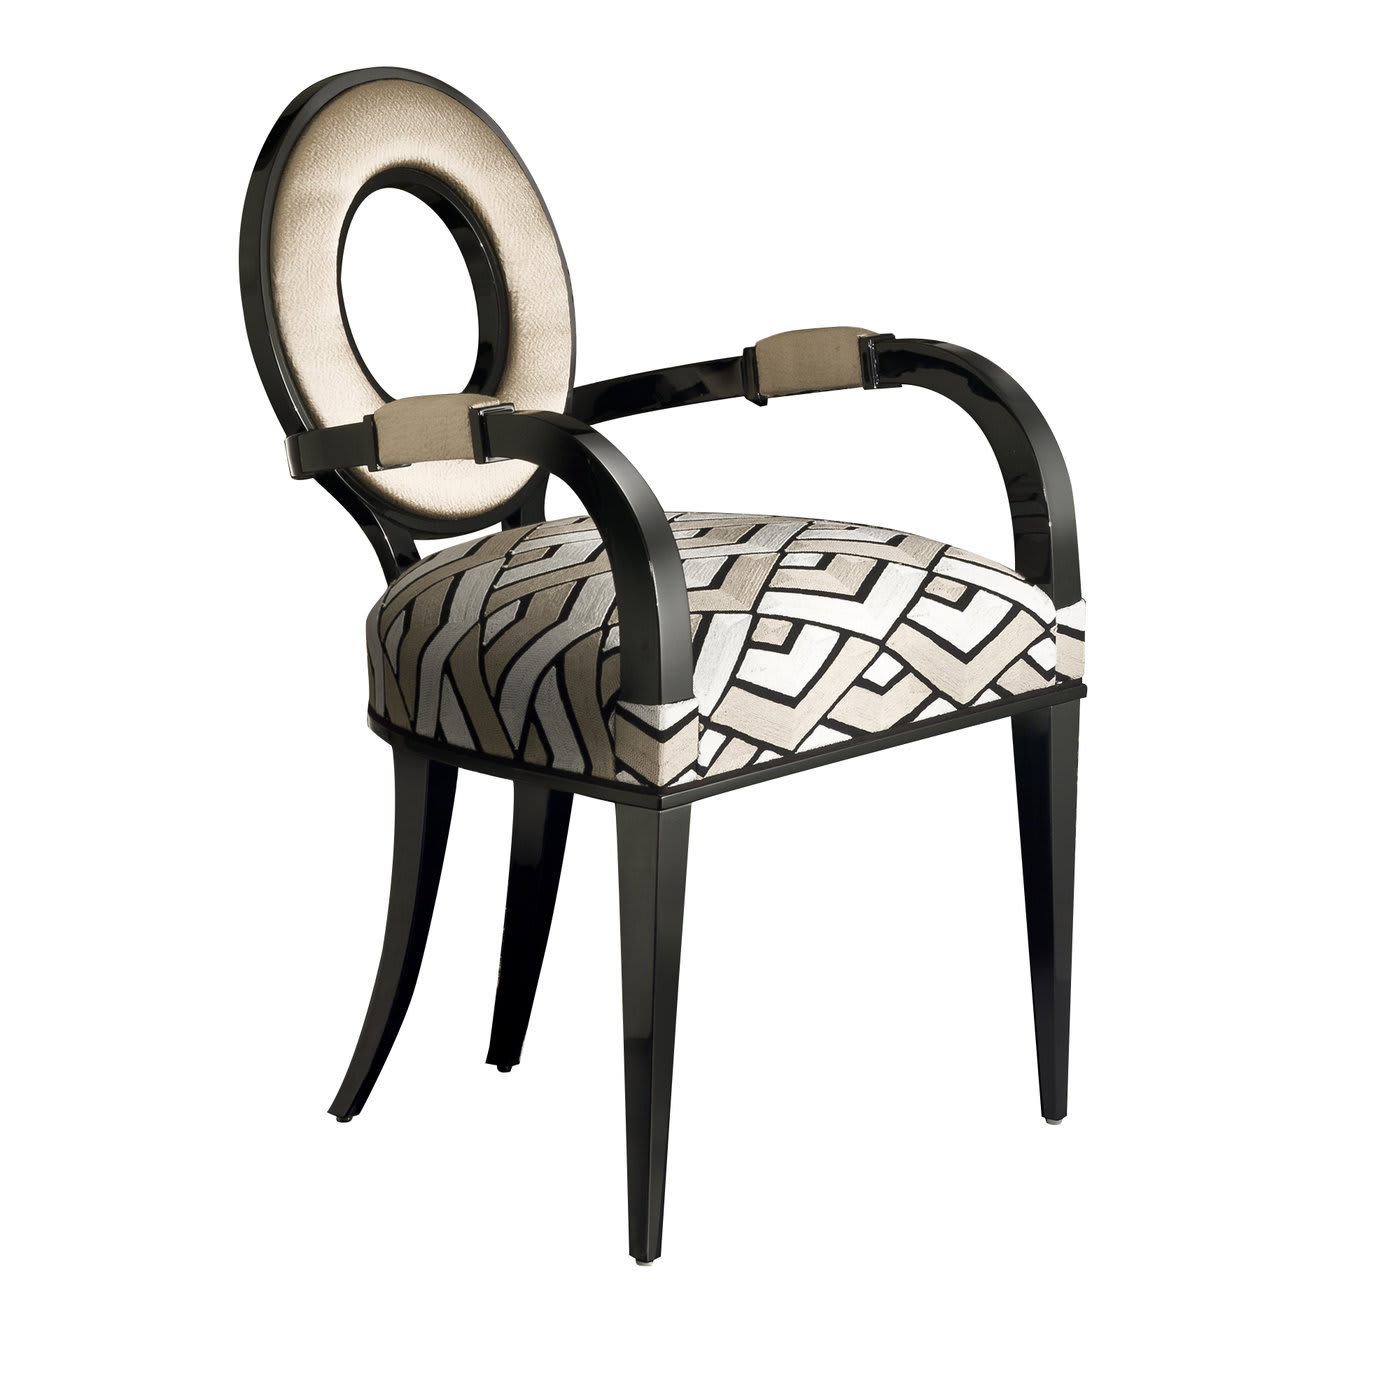 New Moon Black Chair - Extroverso